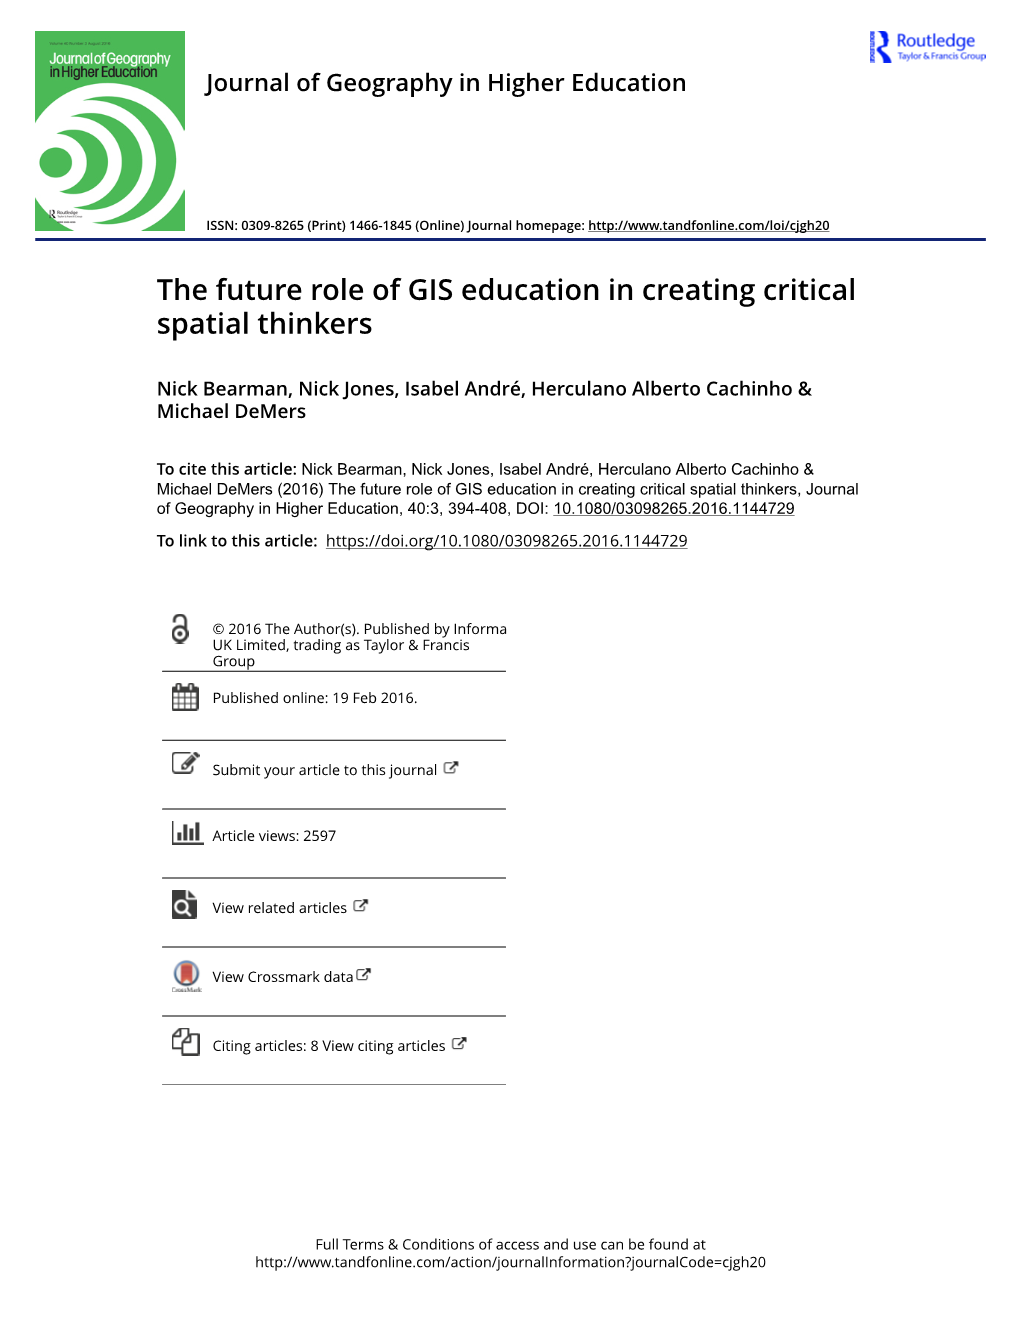 The Future Role of GIS Education in Creating Critical Spatial Thinkers